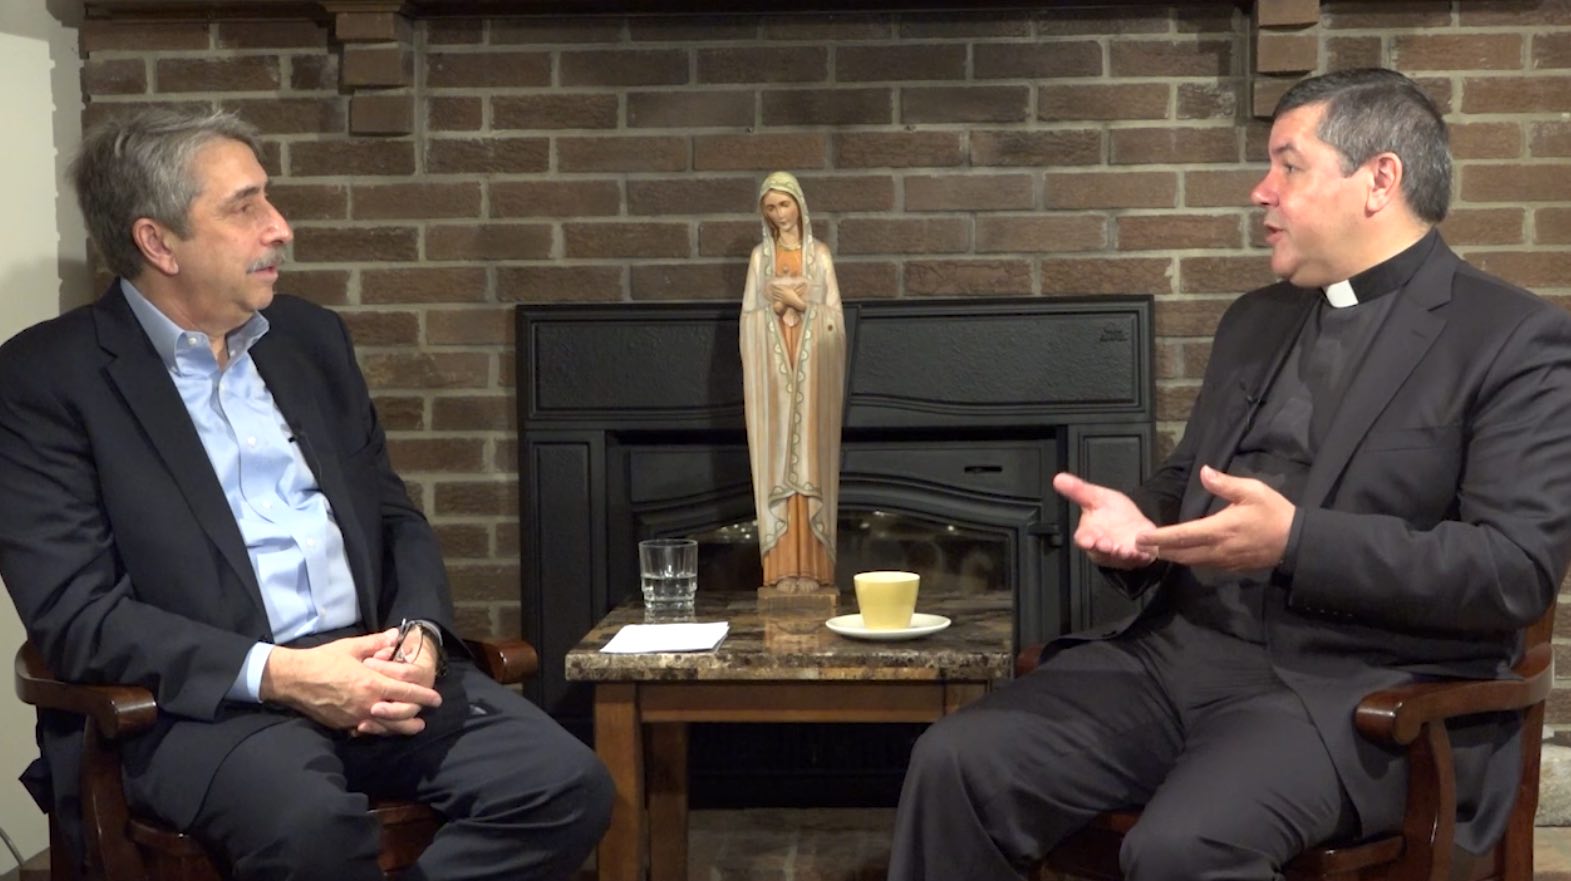 Finding new meaning in the Fatima message with David Carollo and Fr. Francisco Pereira (Part 3 of 3)